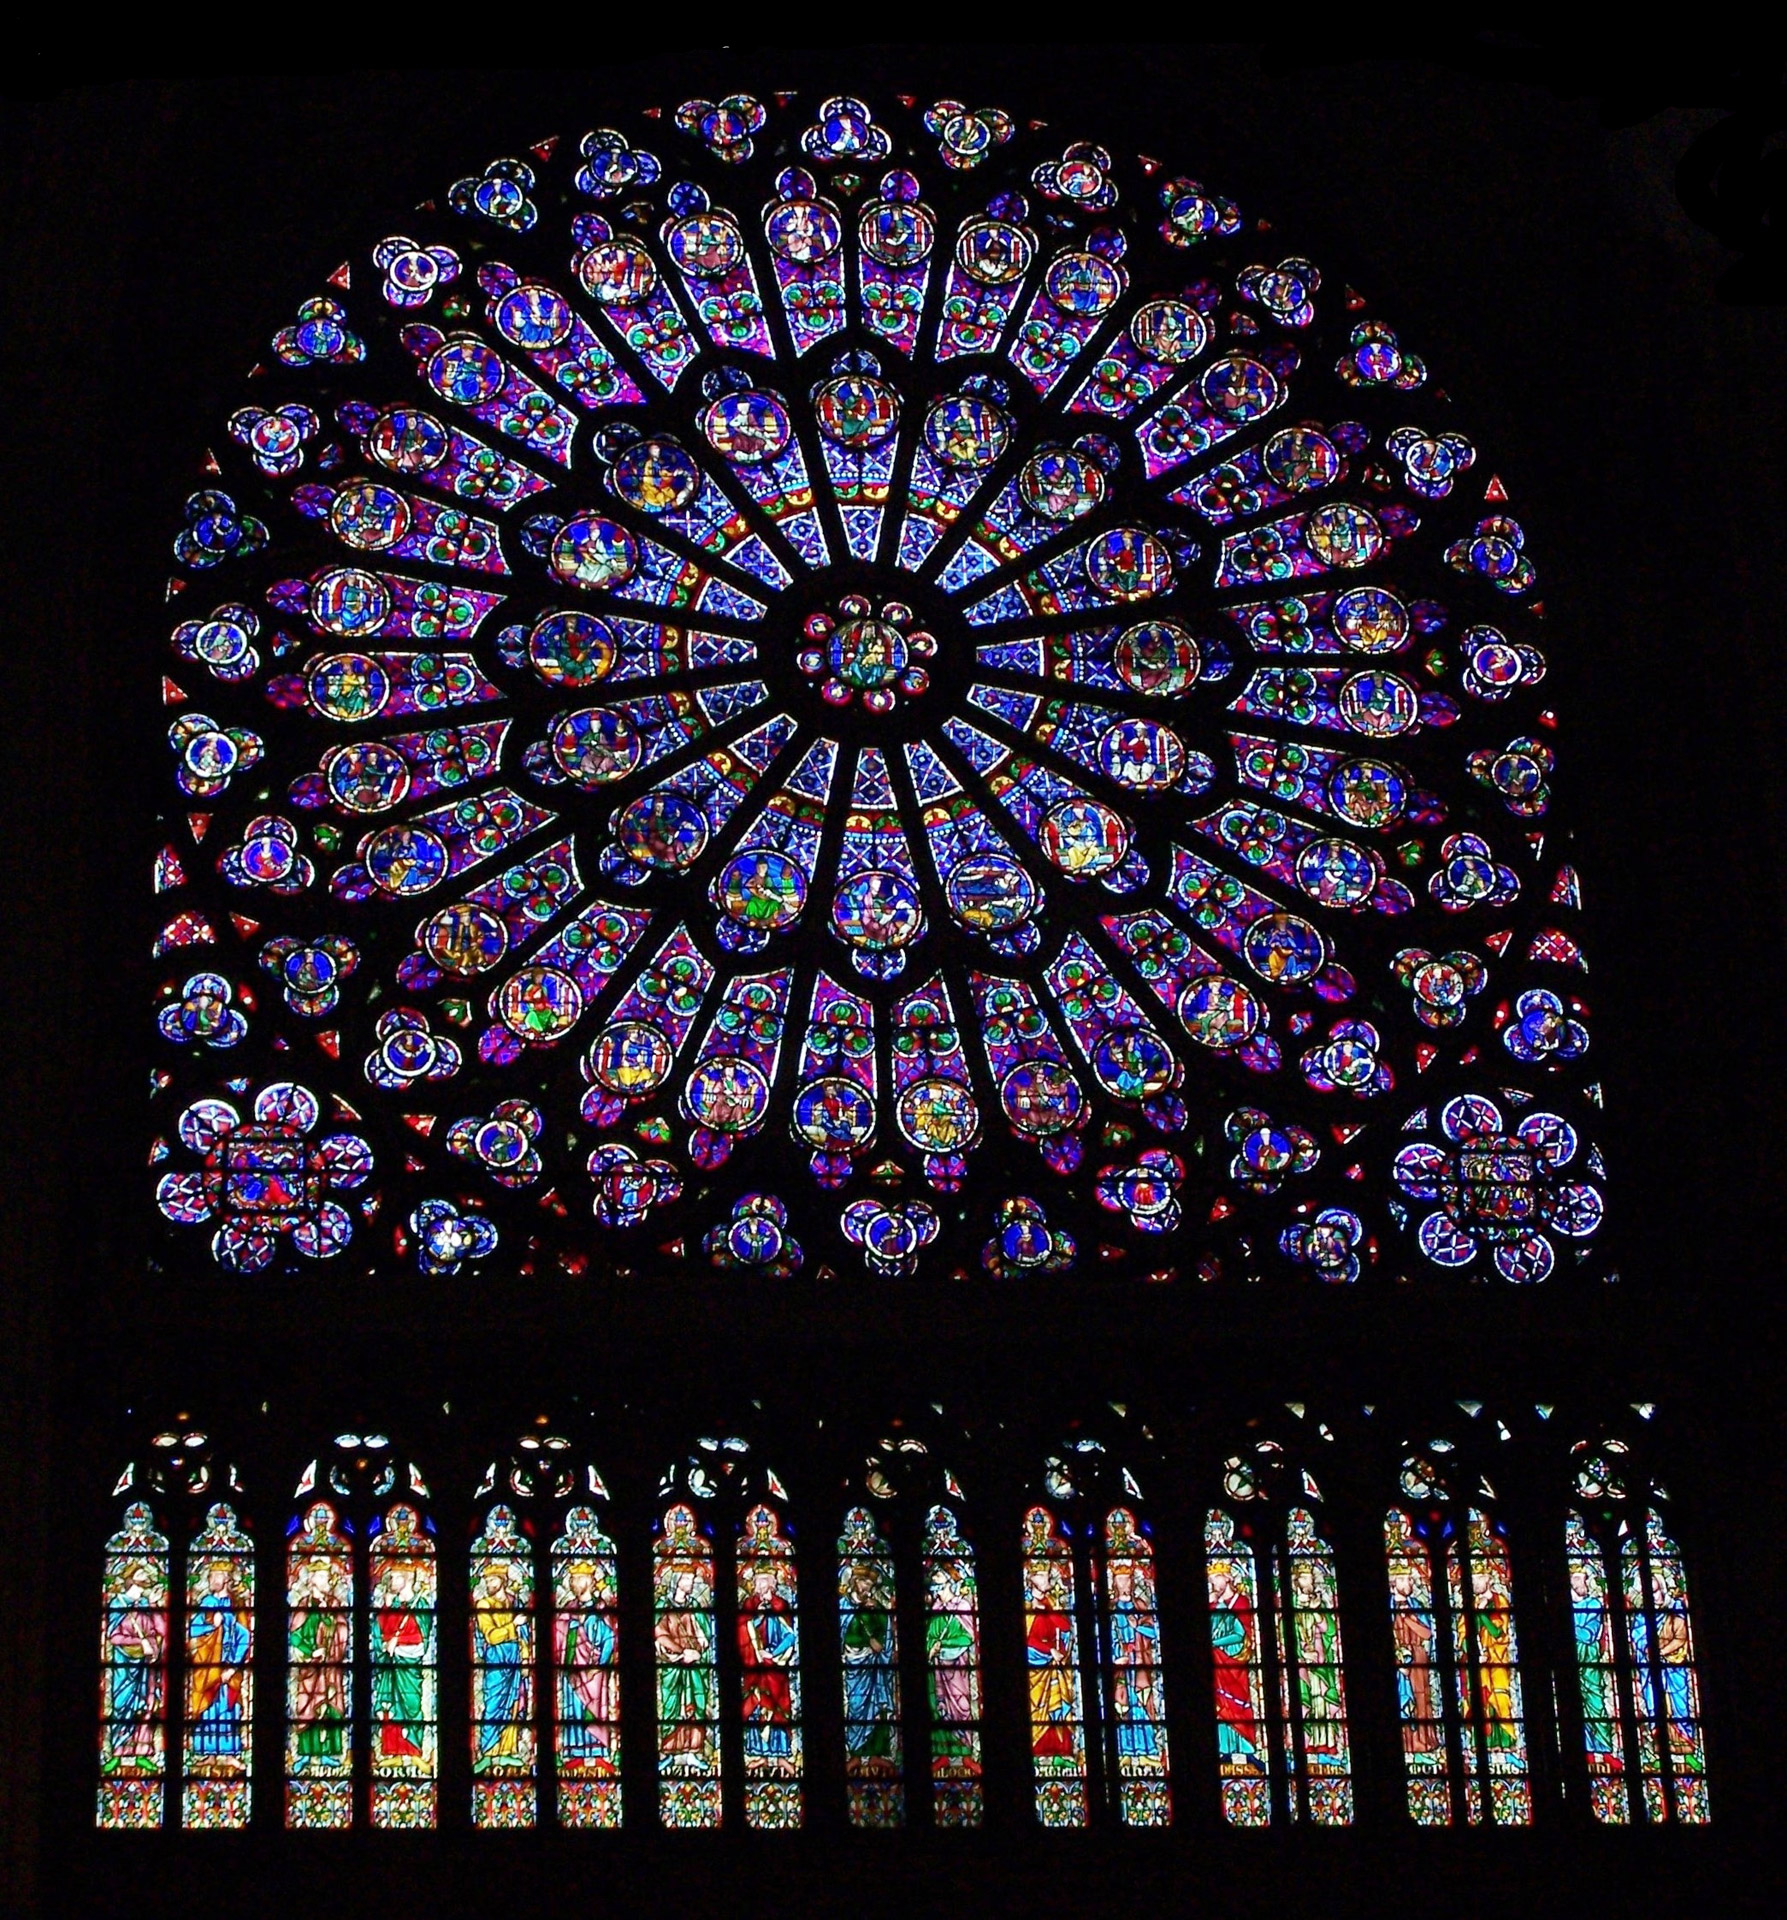 The Full Stained Glass Window